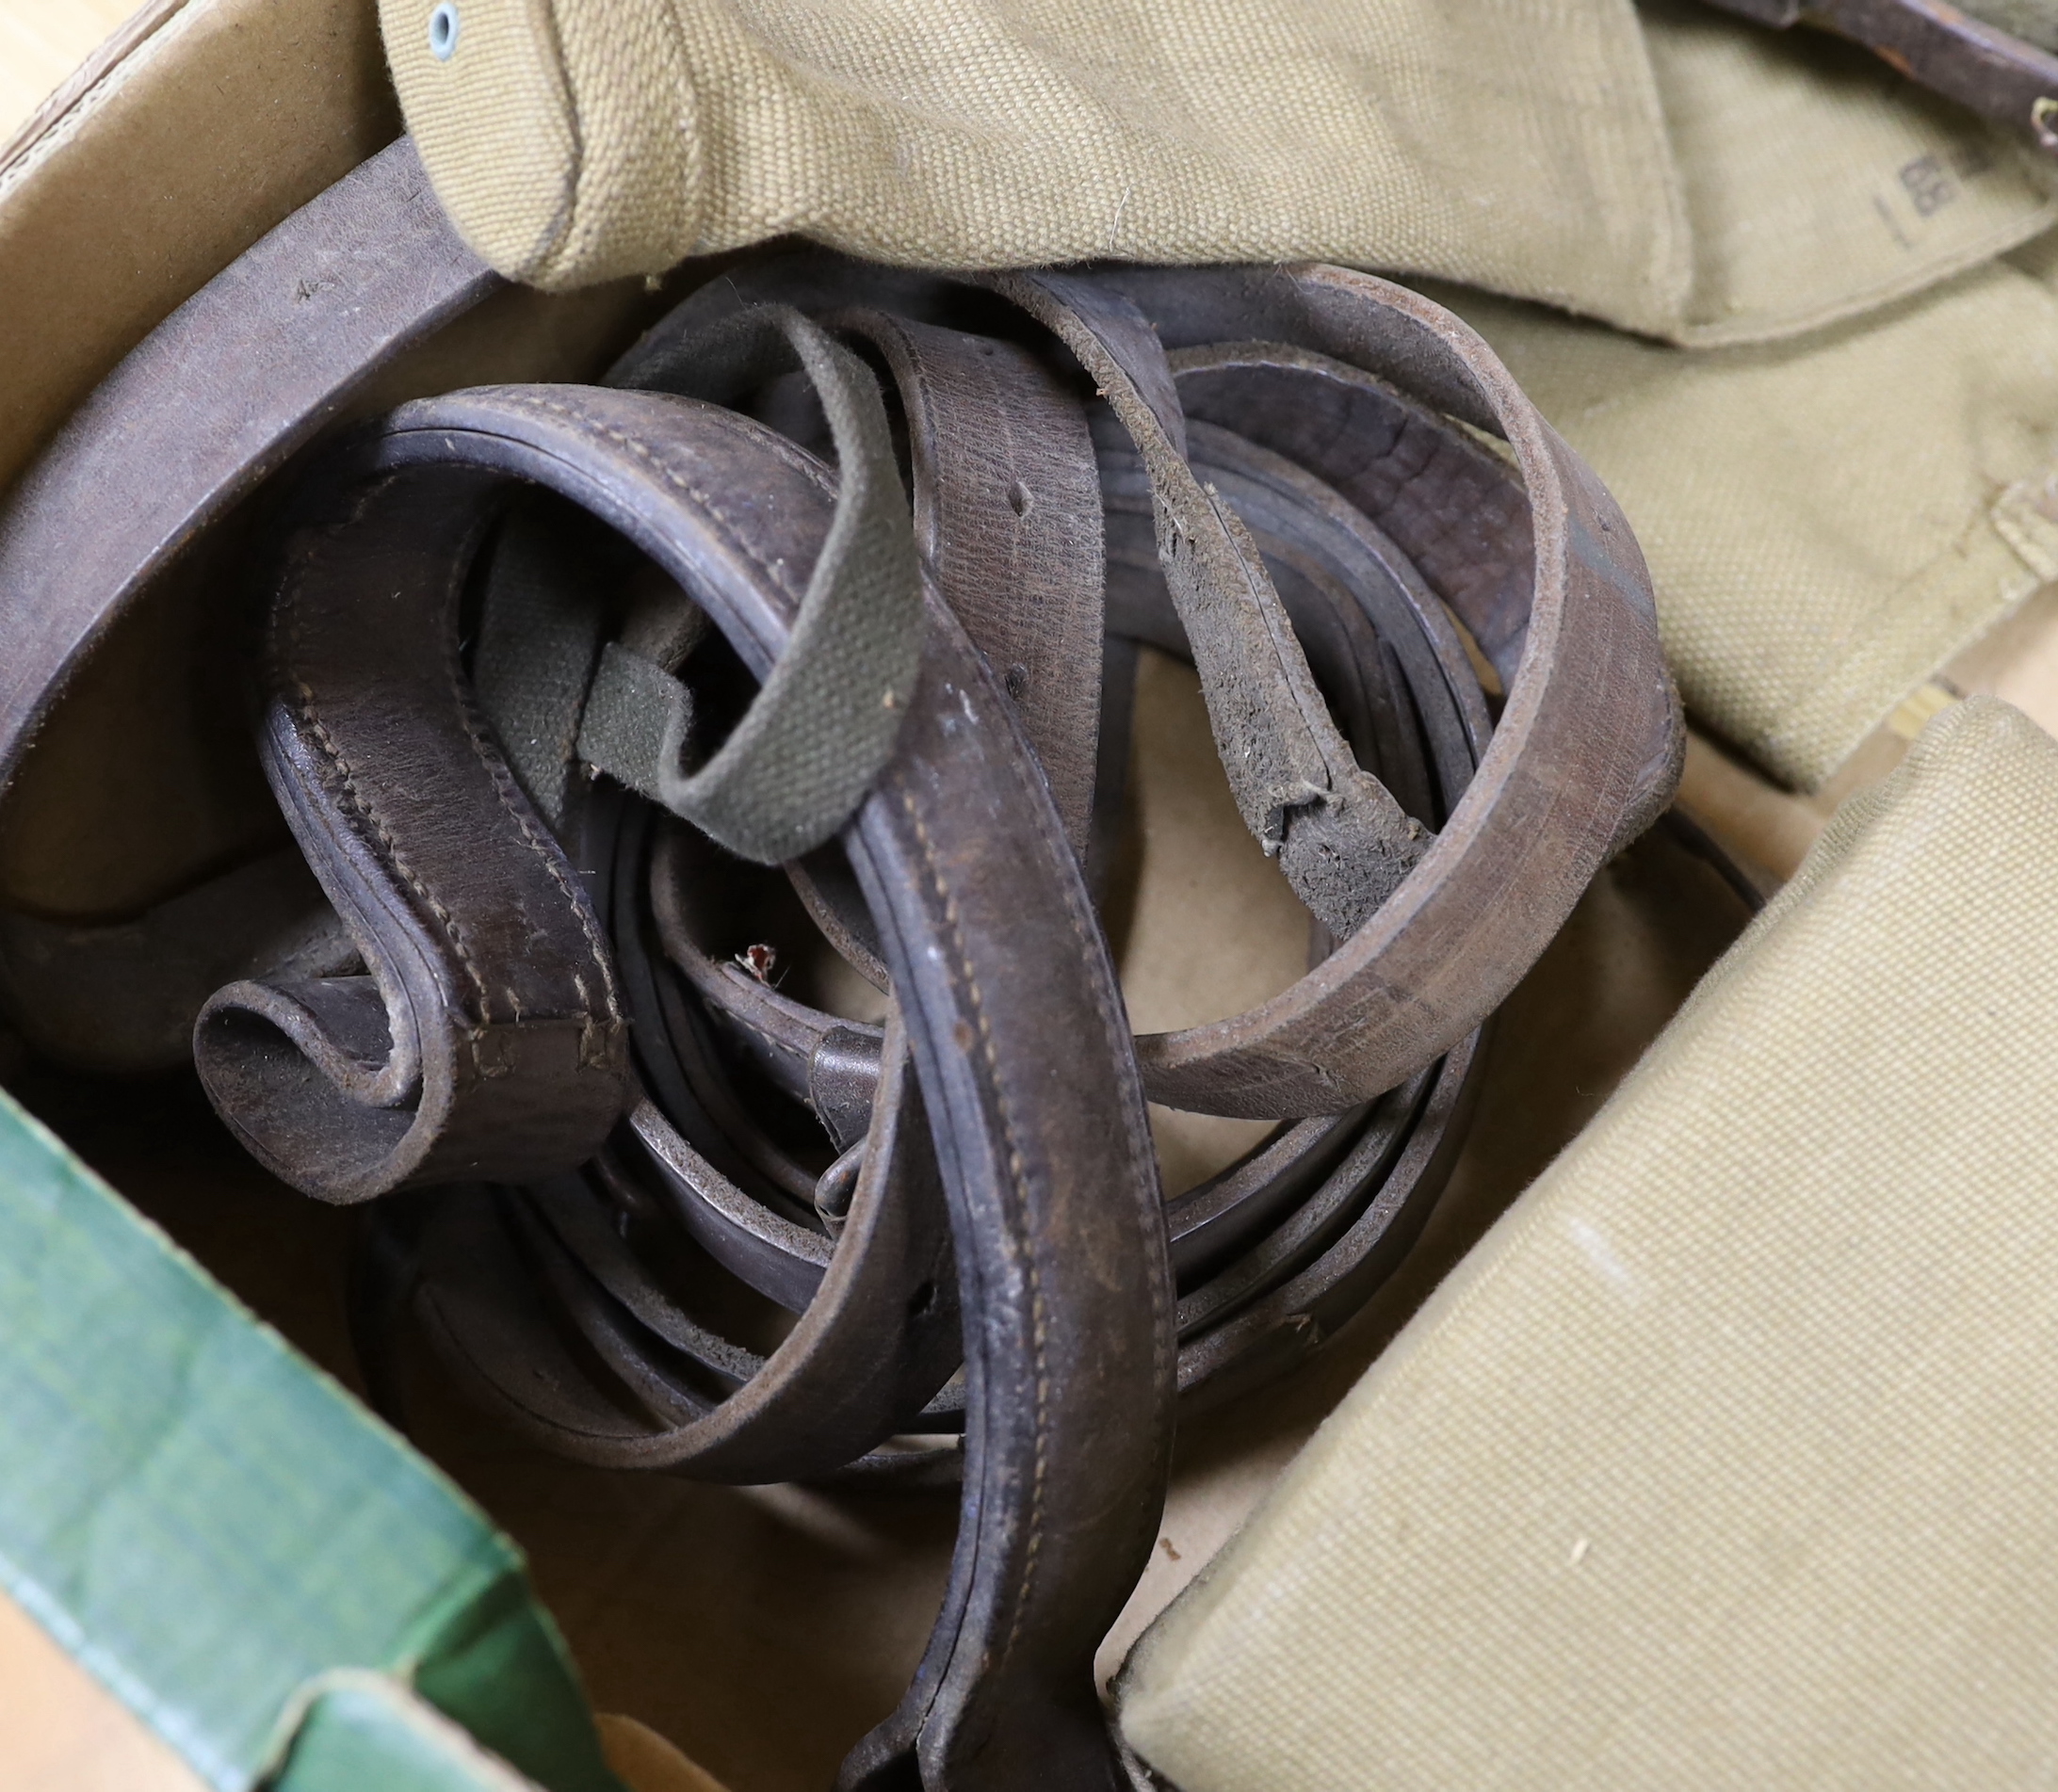 A collection of militaria including a union flag, gunners sight, camouflage webbing, a water bottle, - Image 4 of 5